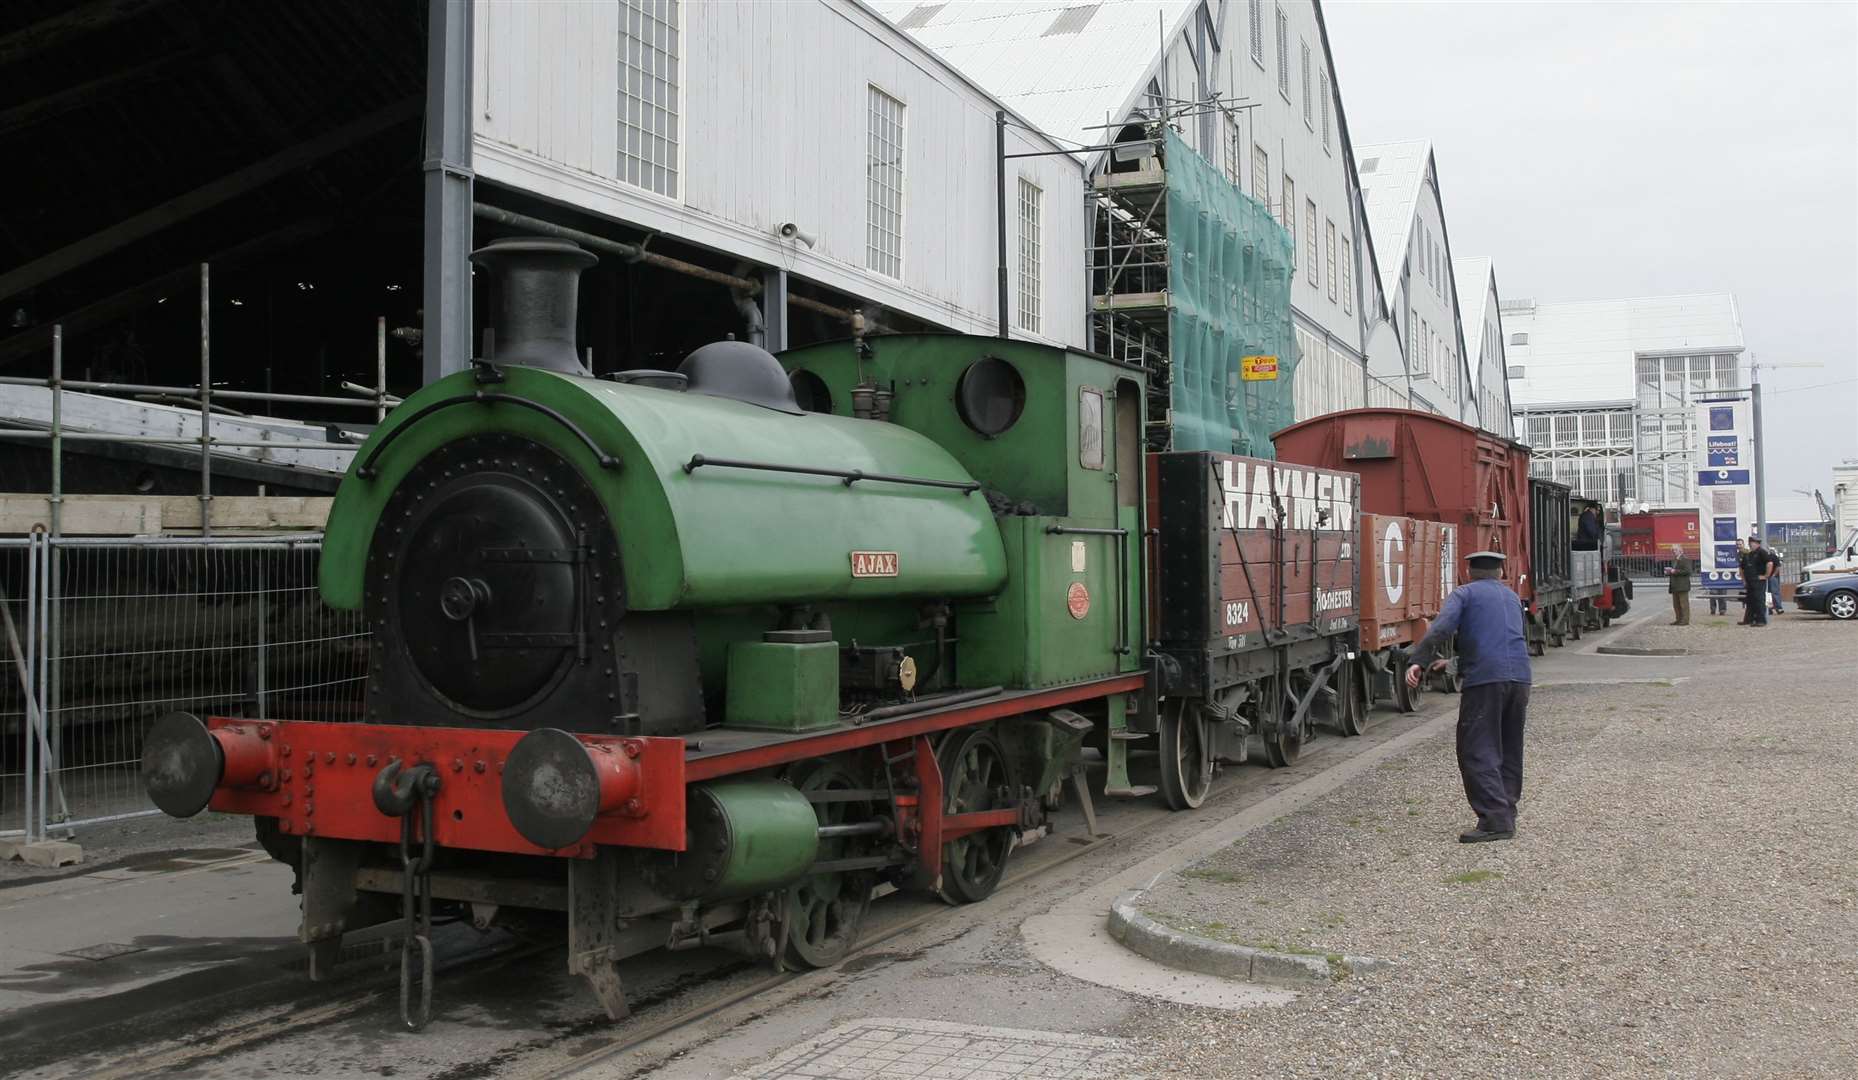 Trains at the dockyard